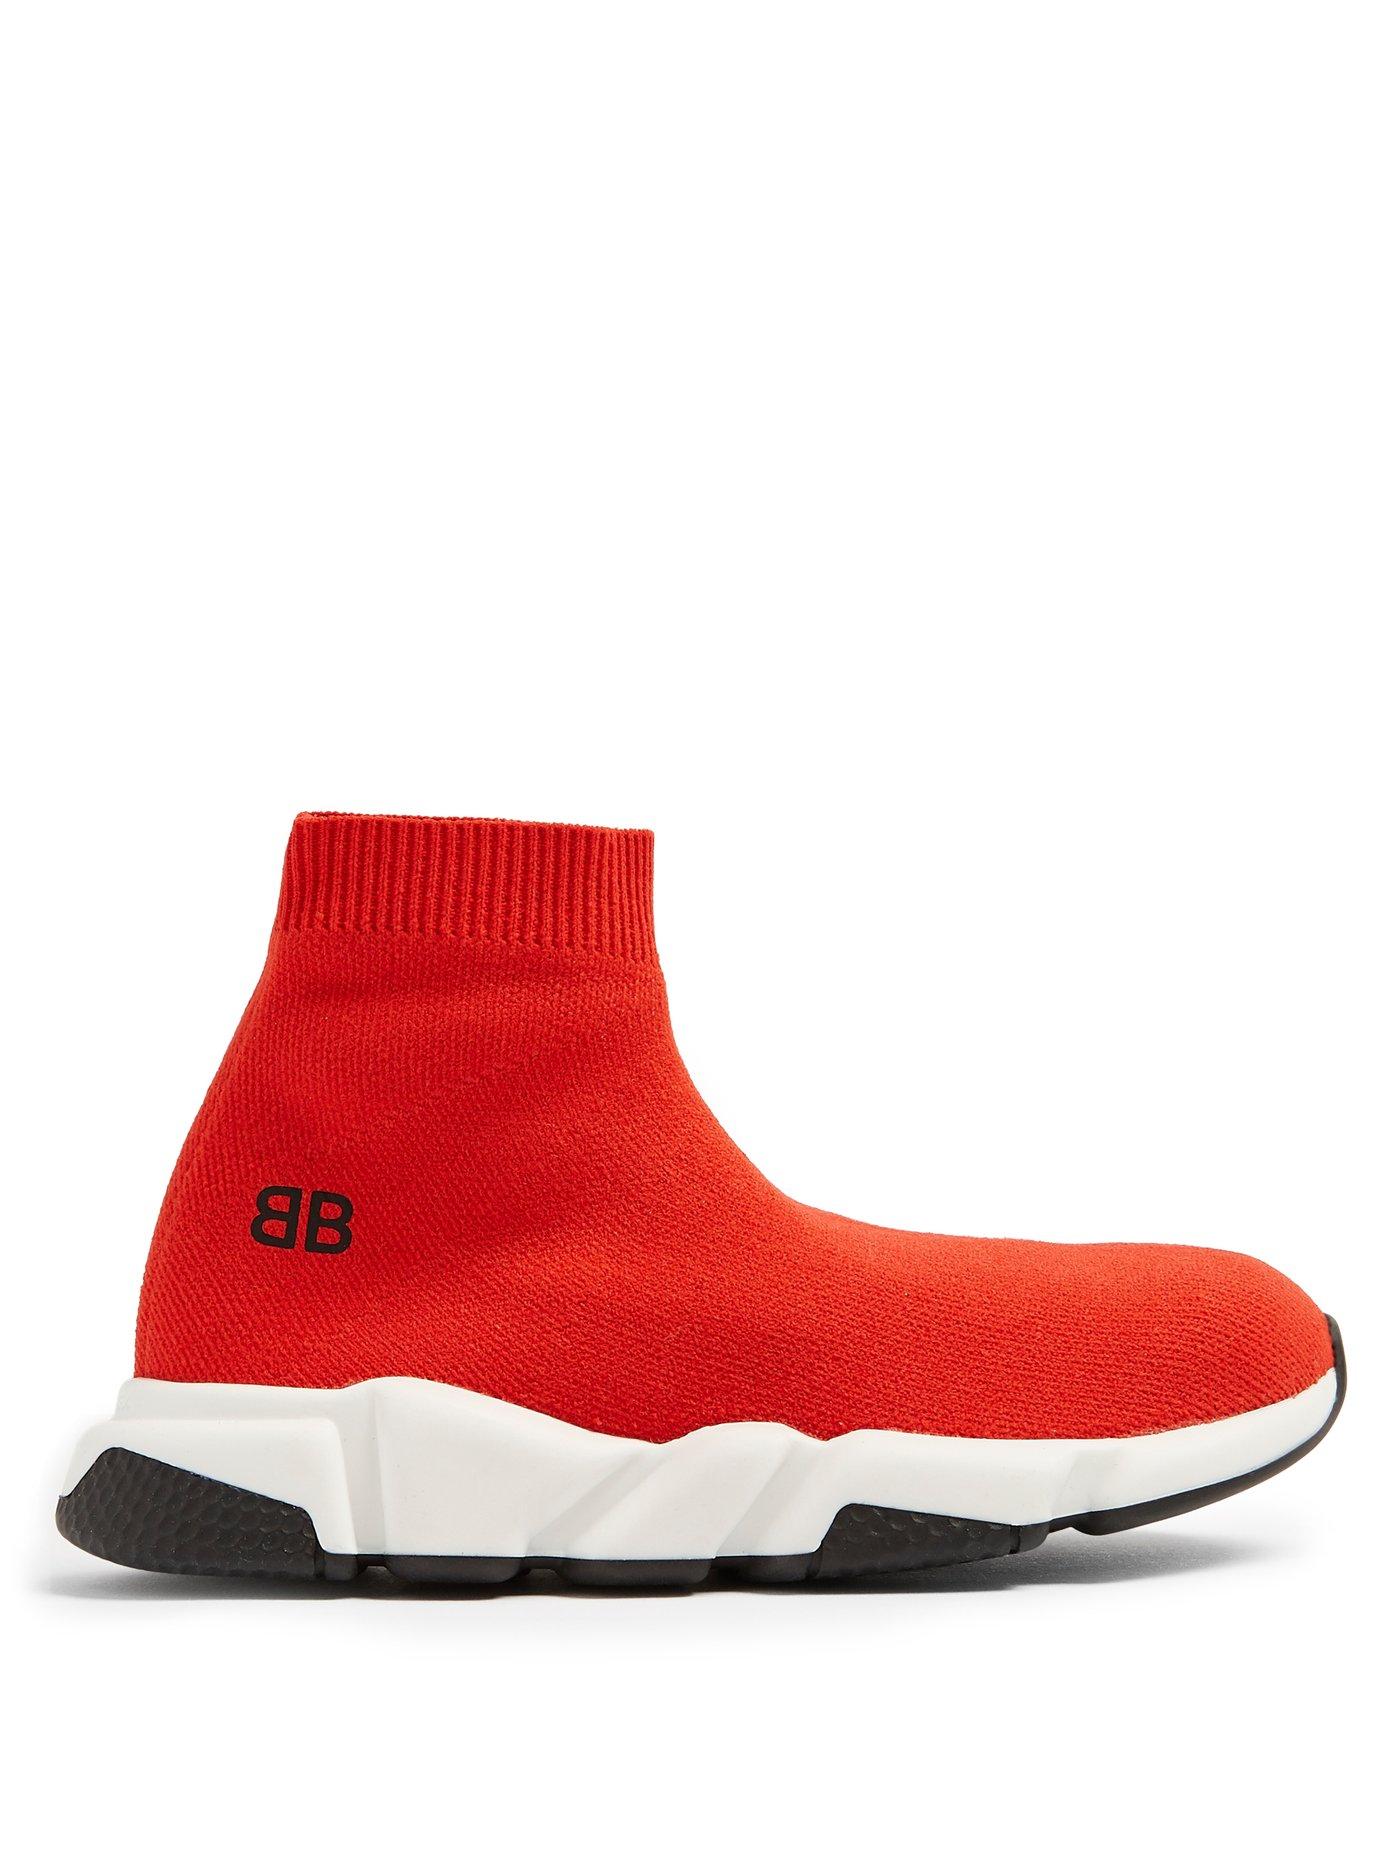 Balenciaga's Kids Shoes Are Here And 